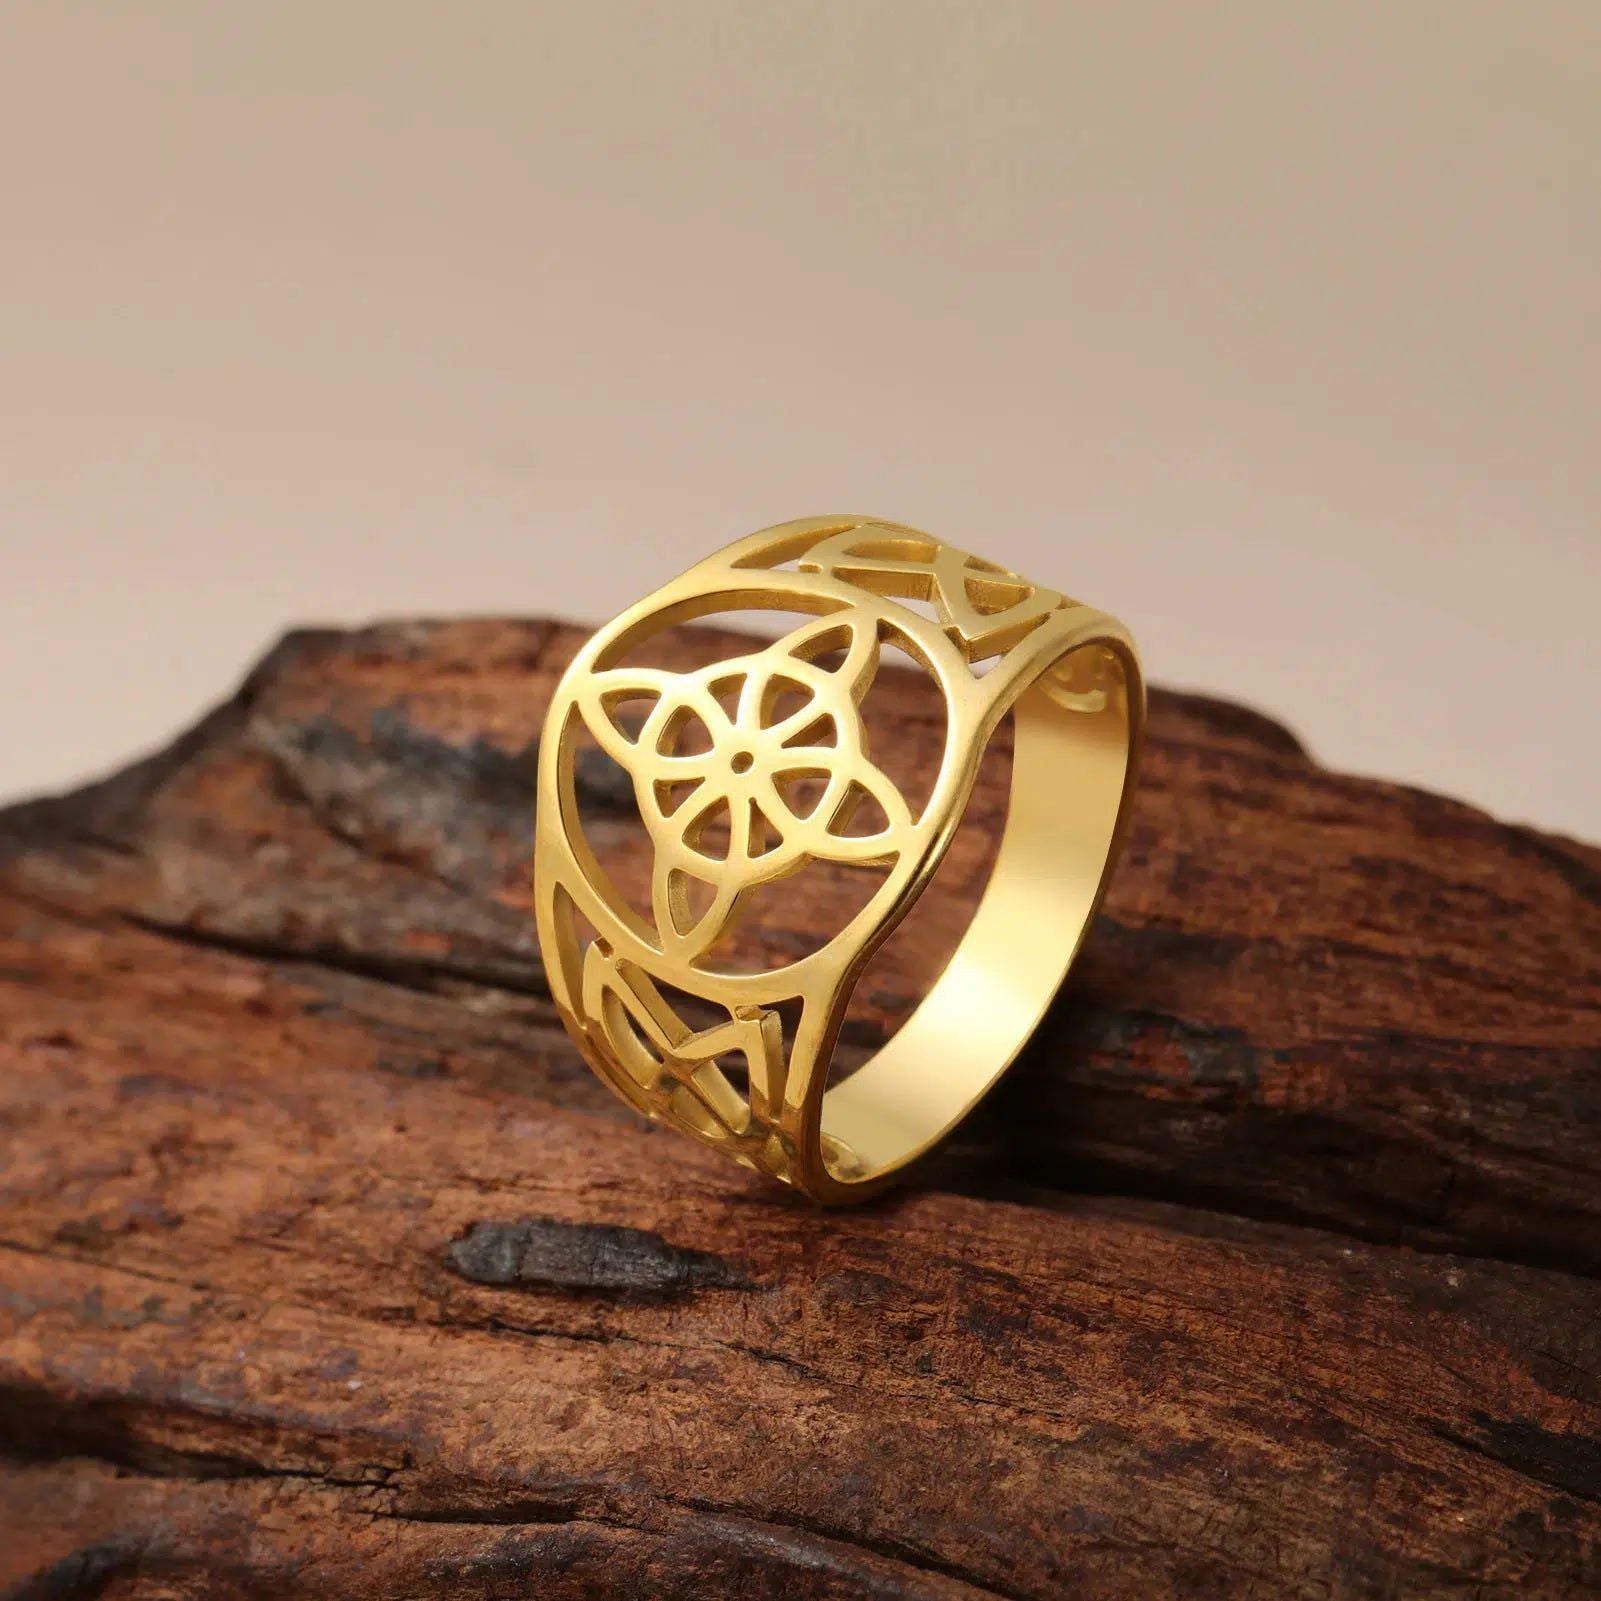 Witch Knot Ring Witchcraft Wicca Triquetra Celtics Knot Ring-MoonChildWorld